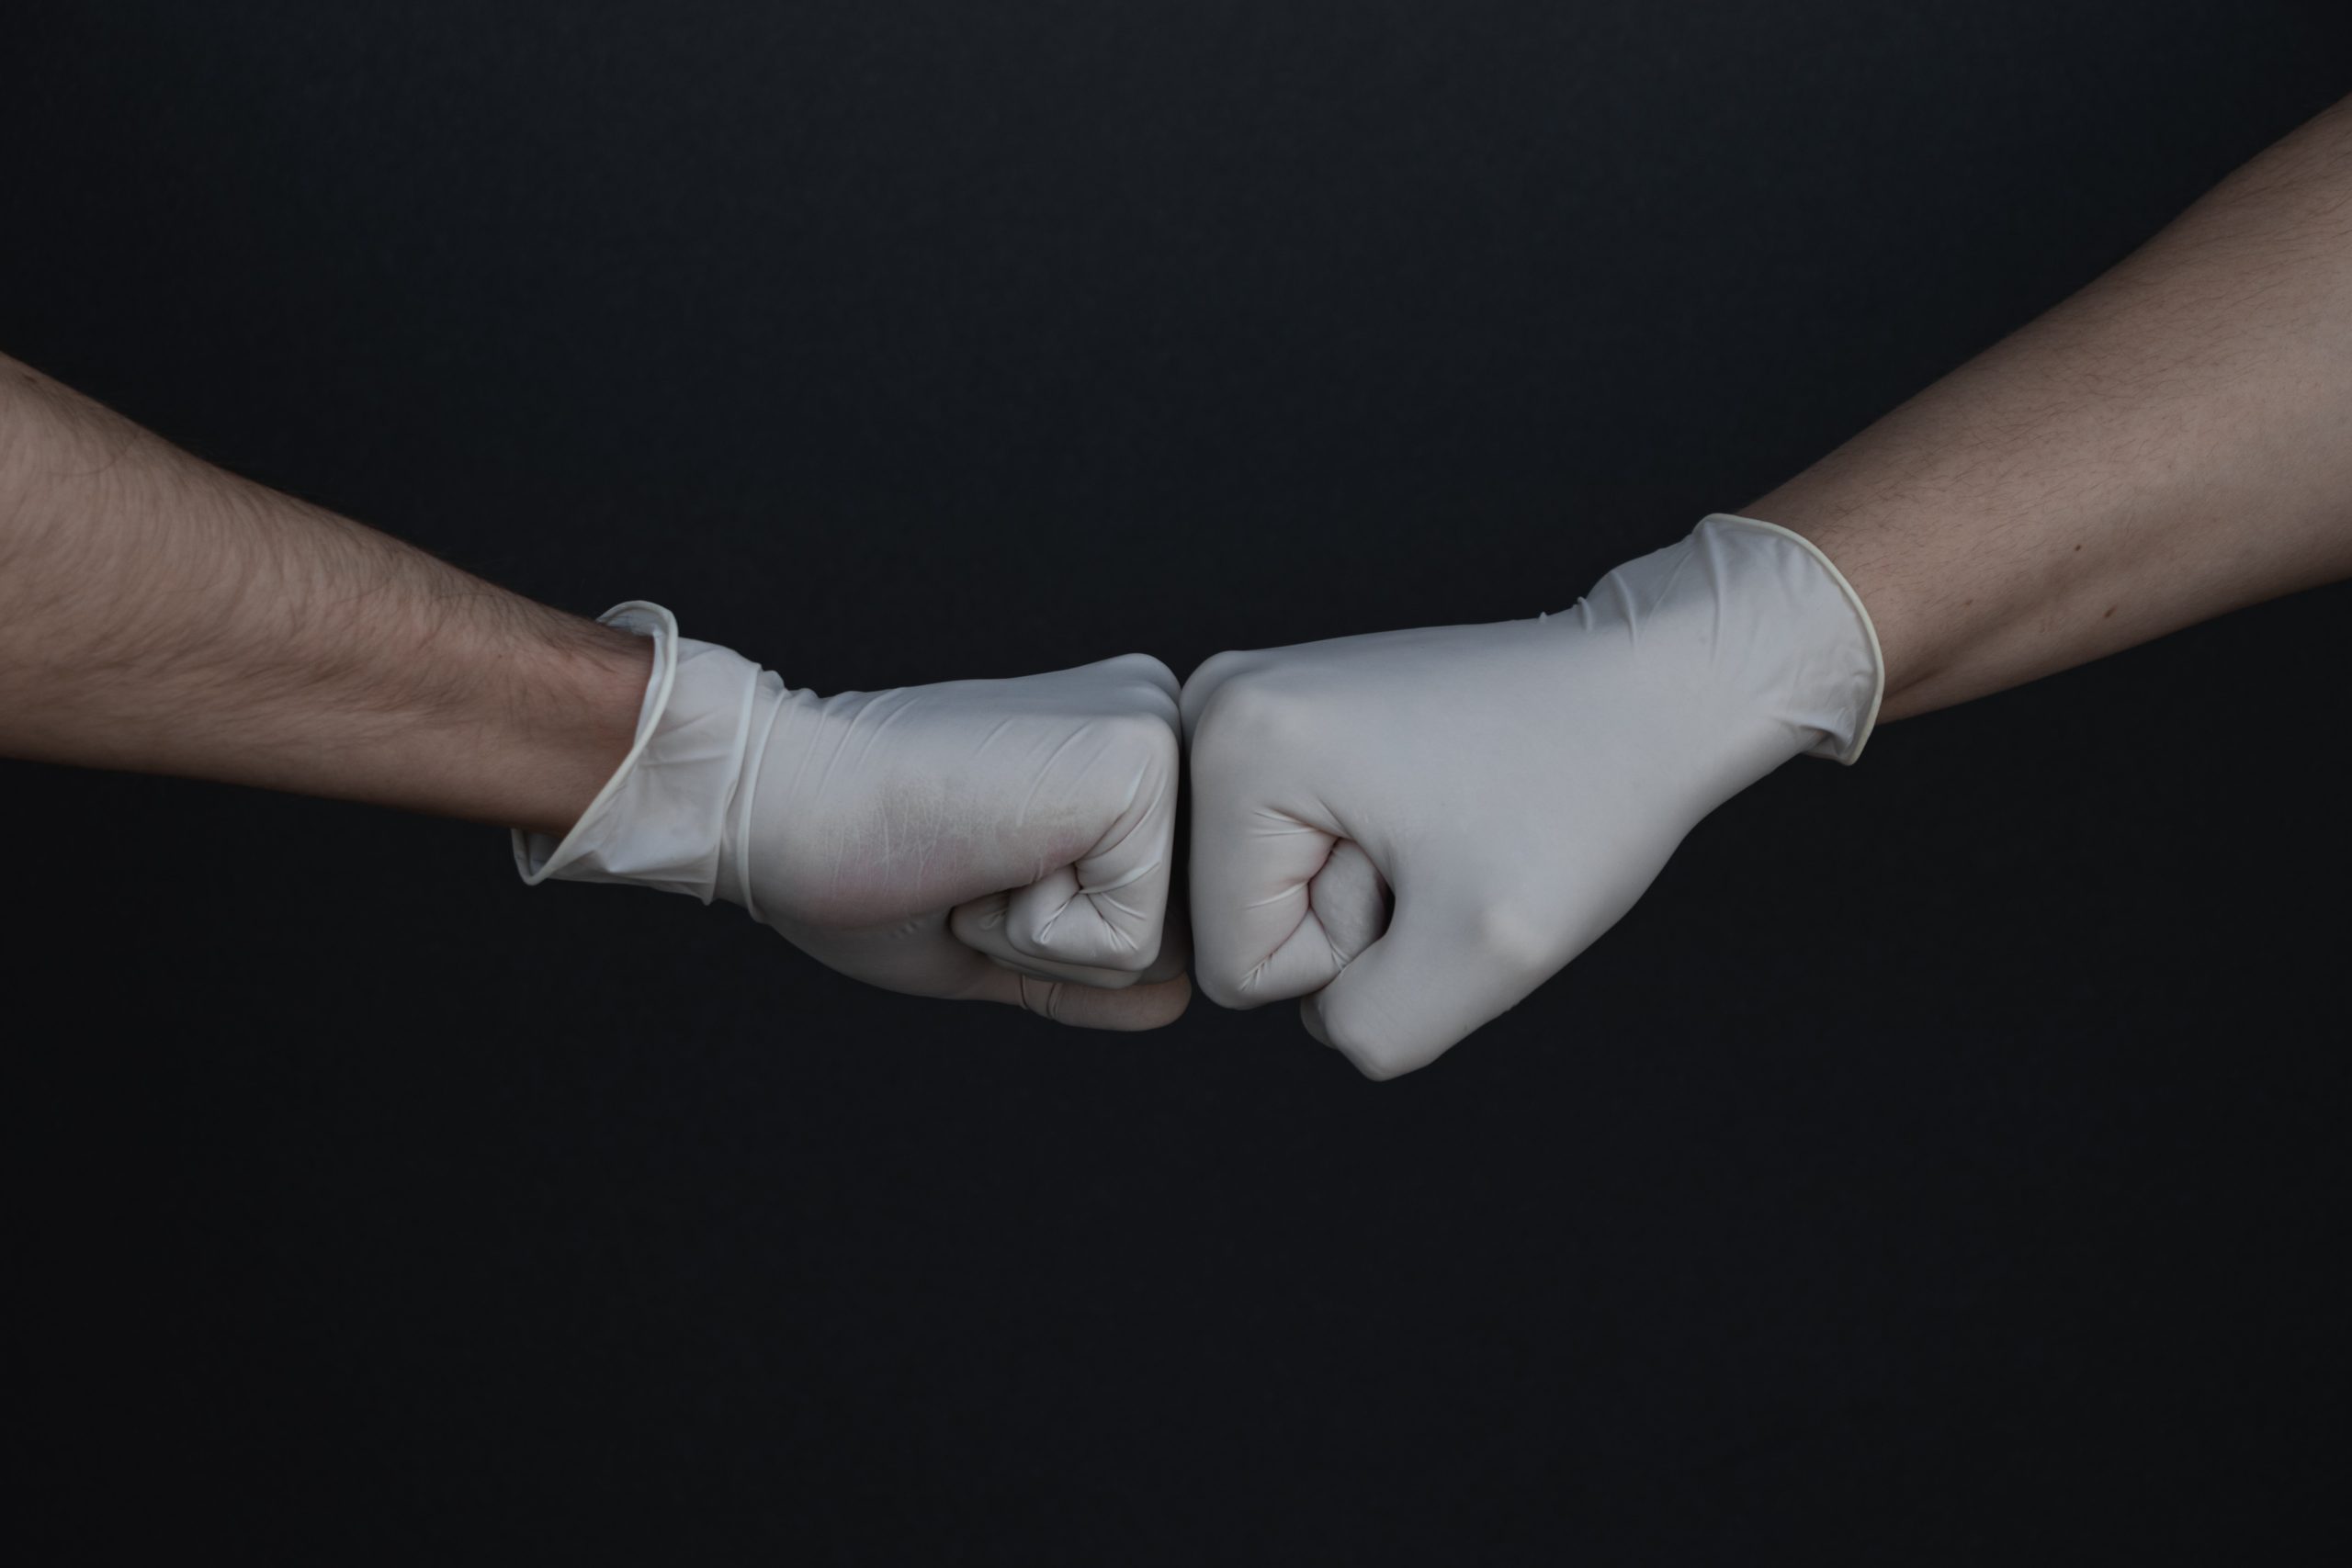 fist-bump with gloves on